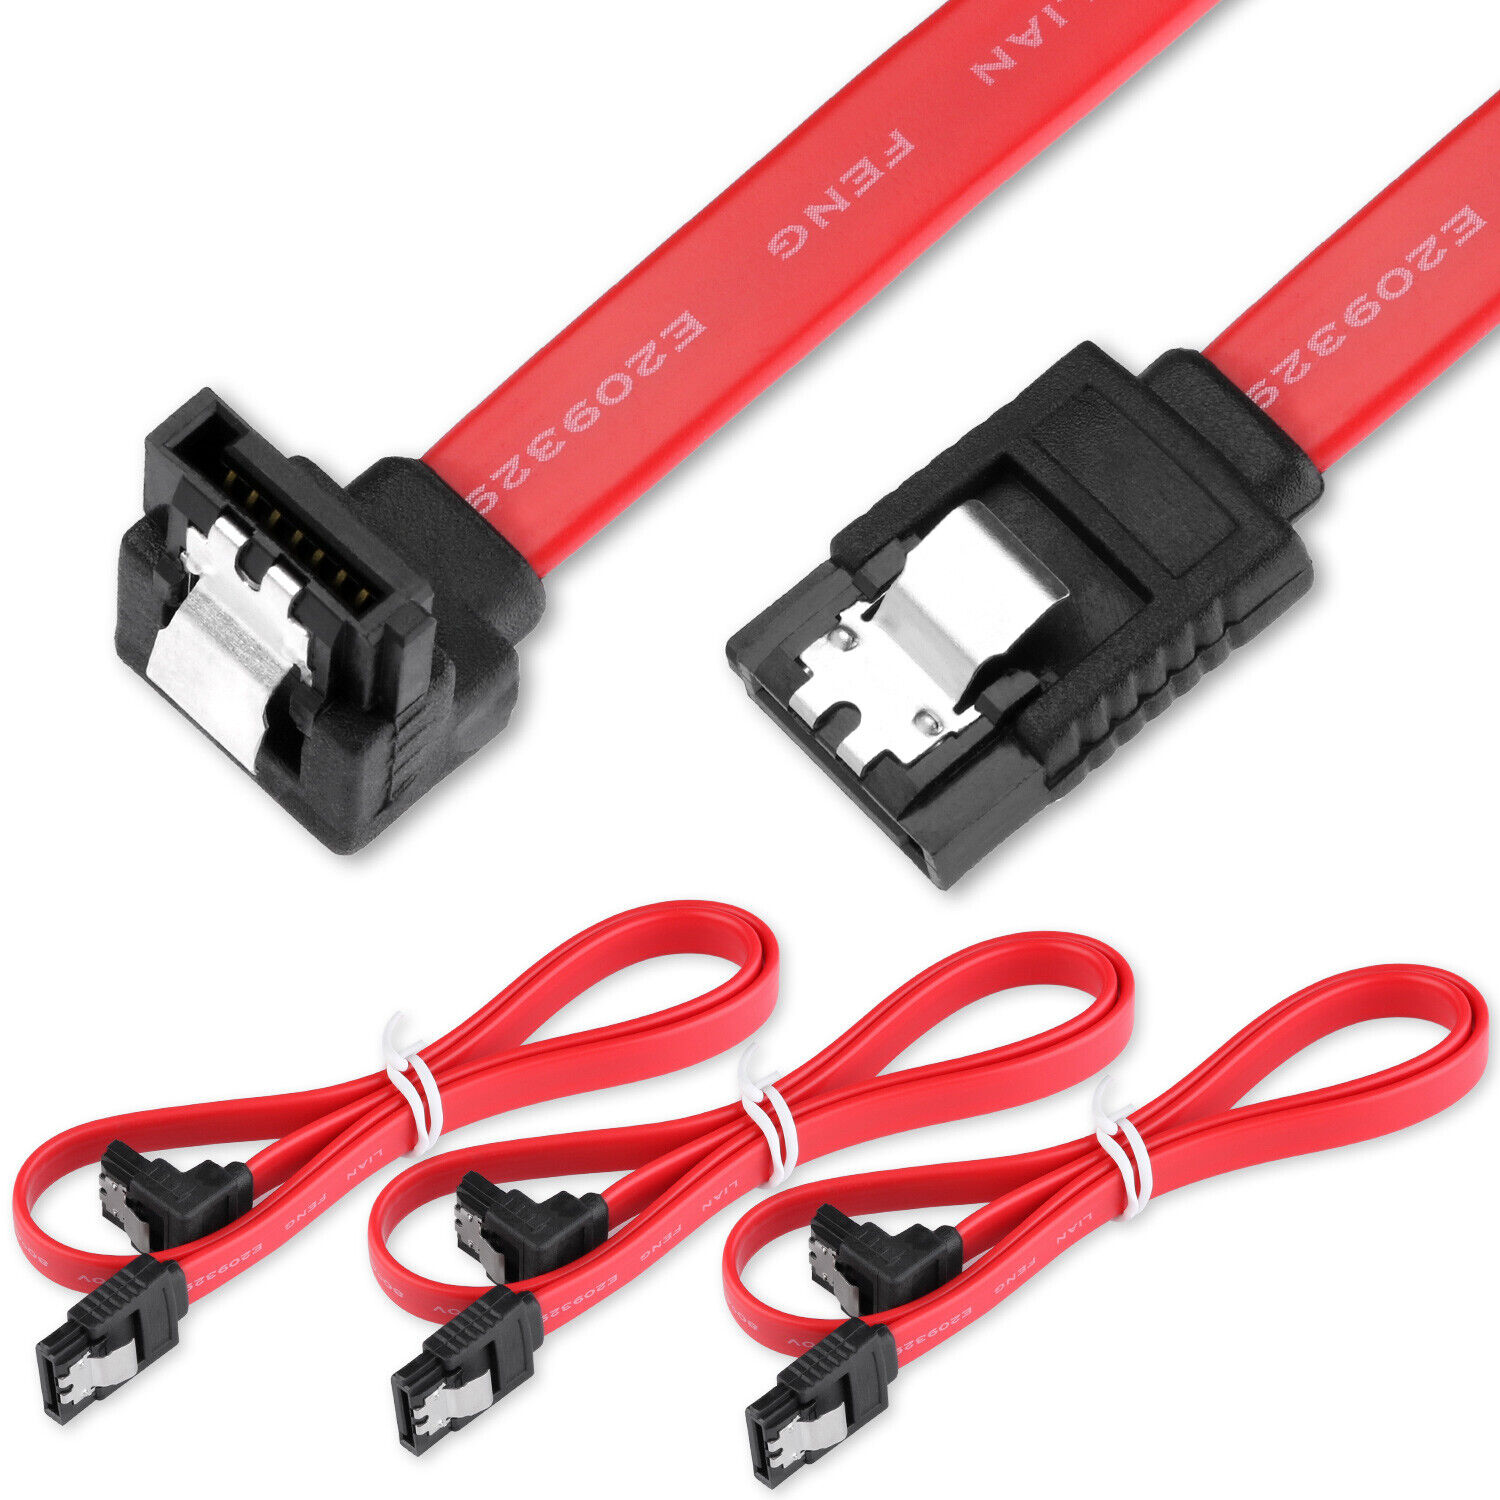 3 Pack 18-Inch SATA III 6.0 Gbps Cable w/Locking Latch & 90-Degree Plug for HDD